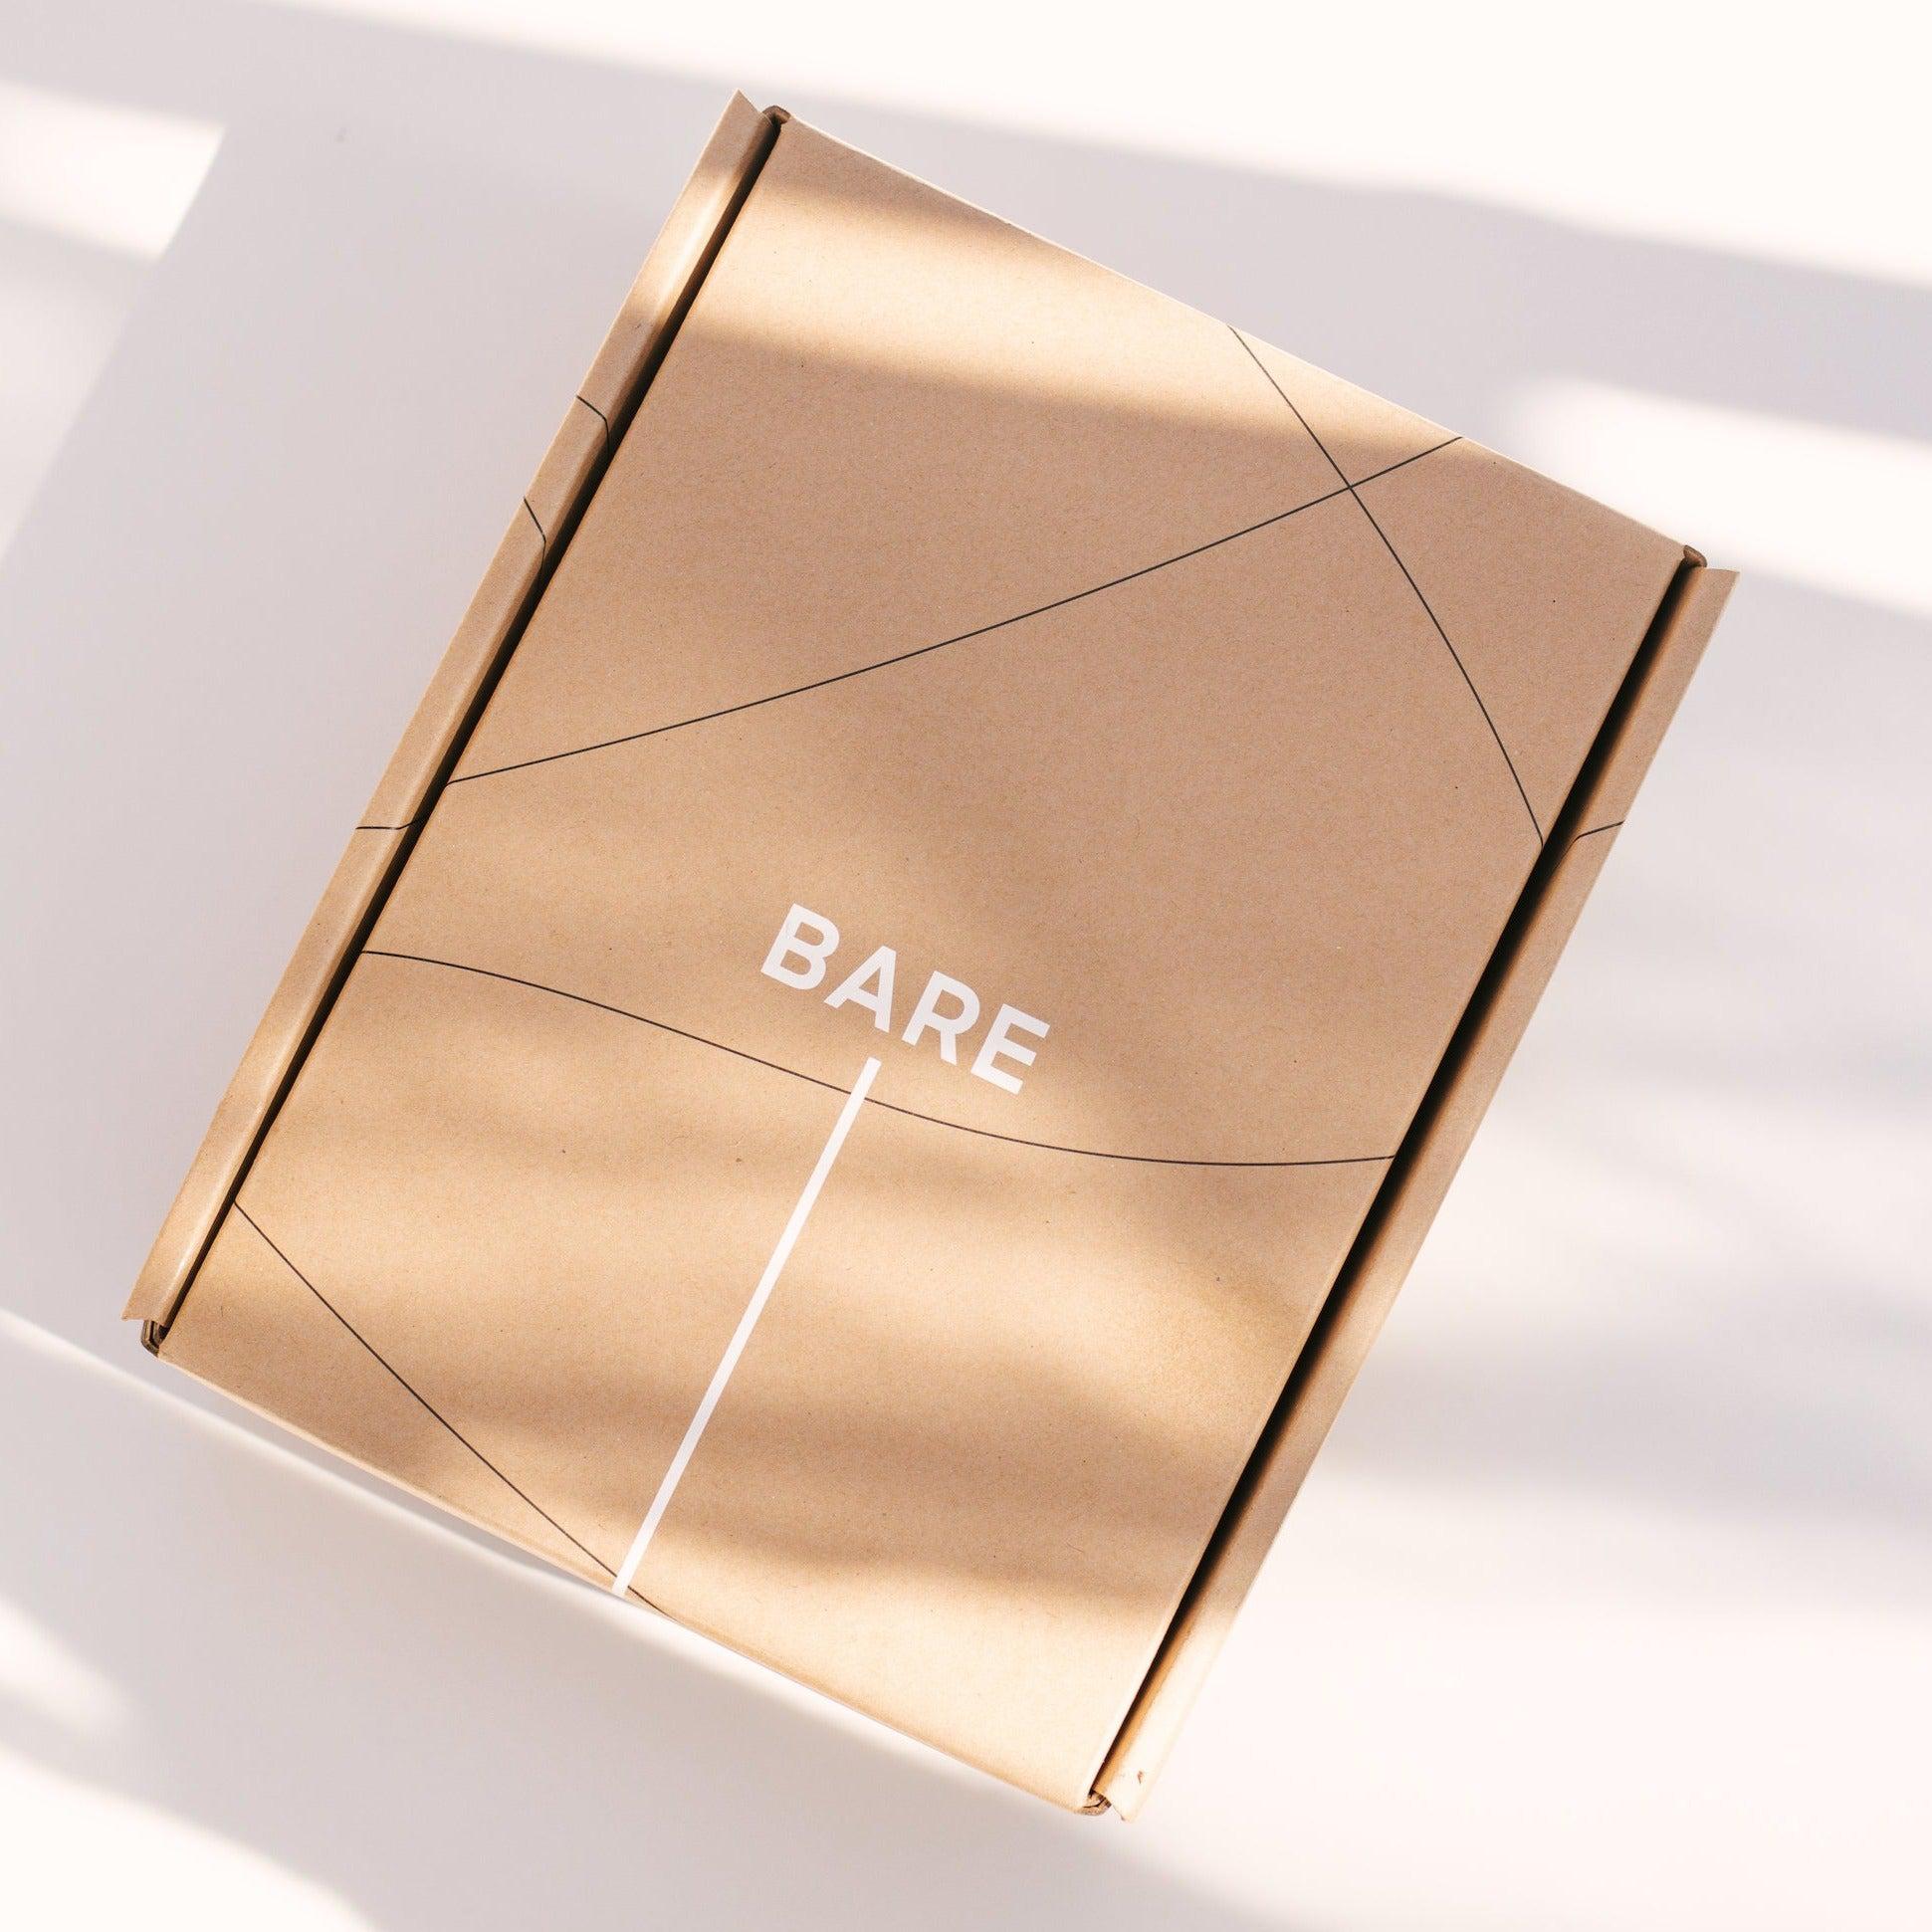 A box for postpartum recovery, "The Bare Essentials Kit," sits on a white surface.